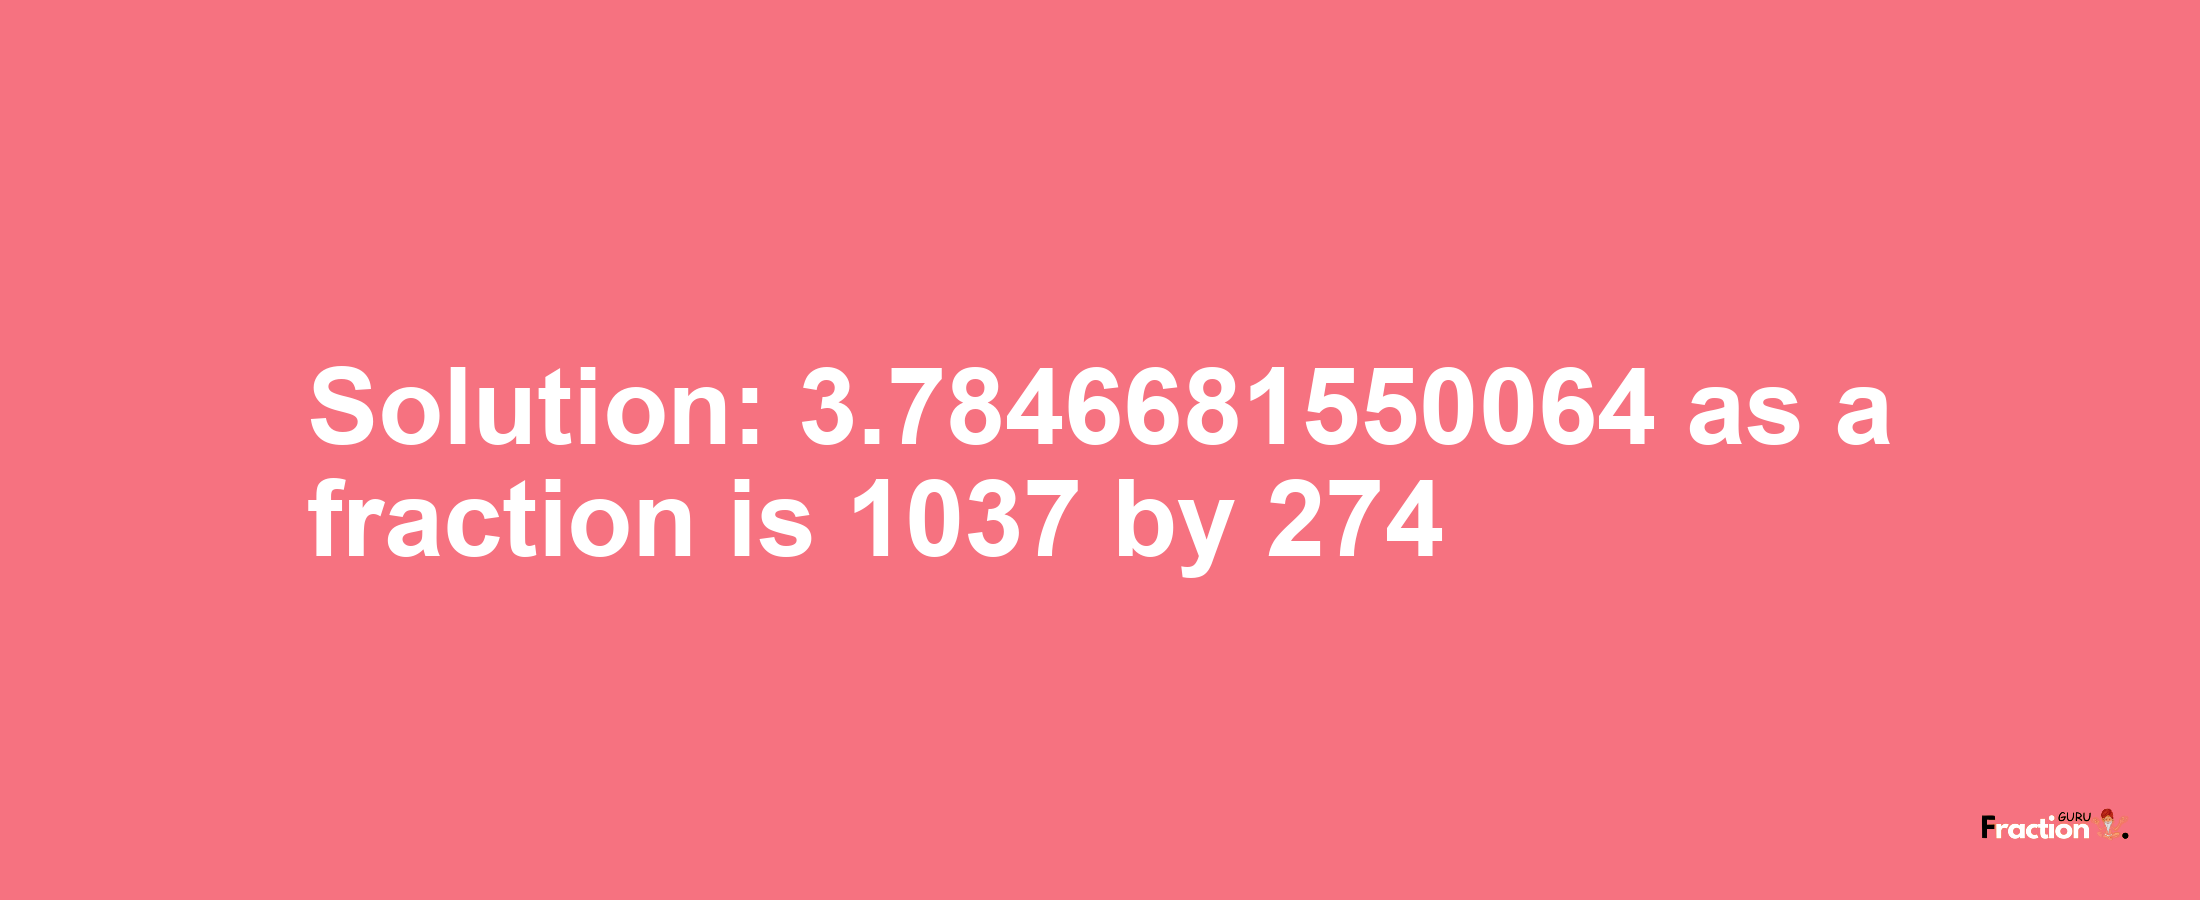 Solution:3.7846681550064 as a fraction is 1037/274